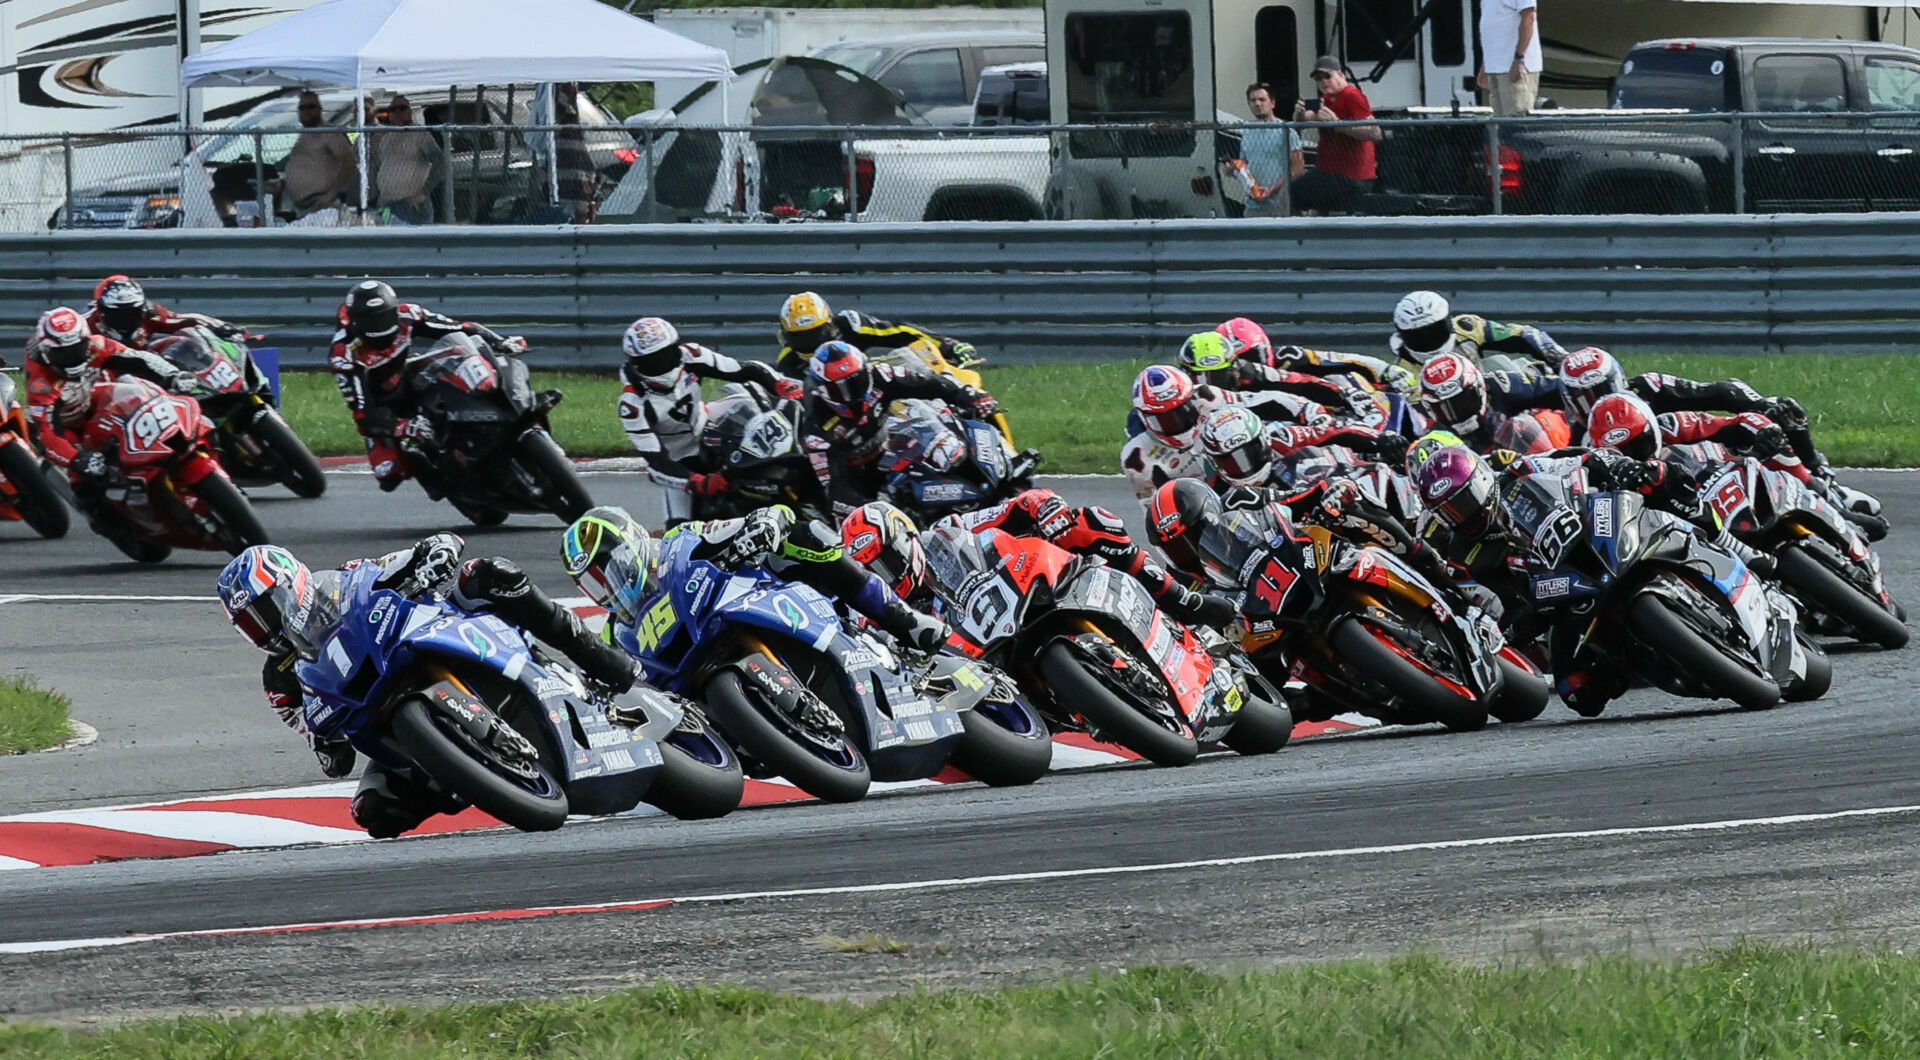 Jake Gagne (1) leads Cameron Petersen (45), Danilo Petrucci (9), Mathew Scholtz (11), PJ Jacobsen (66), and the rest of the field at the start of a MotoAmerica Superbike race in 2022 at NJMP. Photo by Brian J. Nelson.